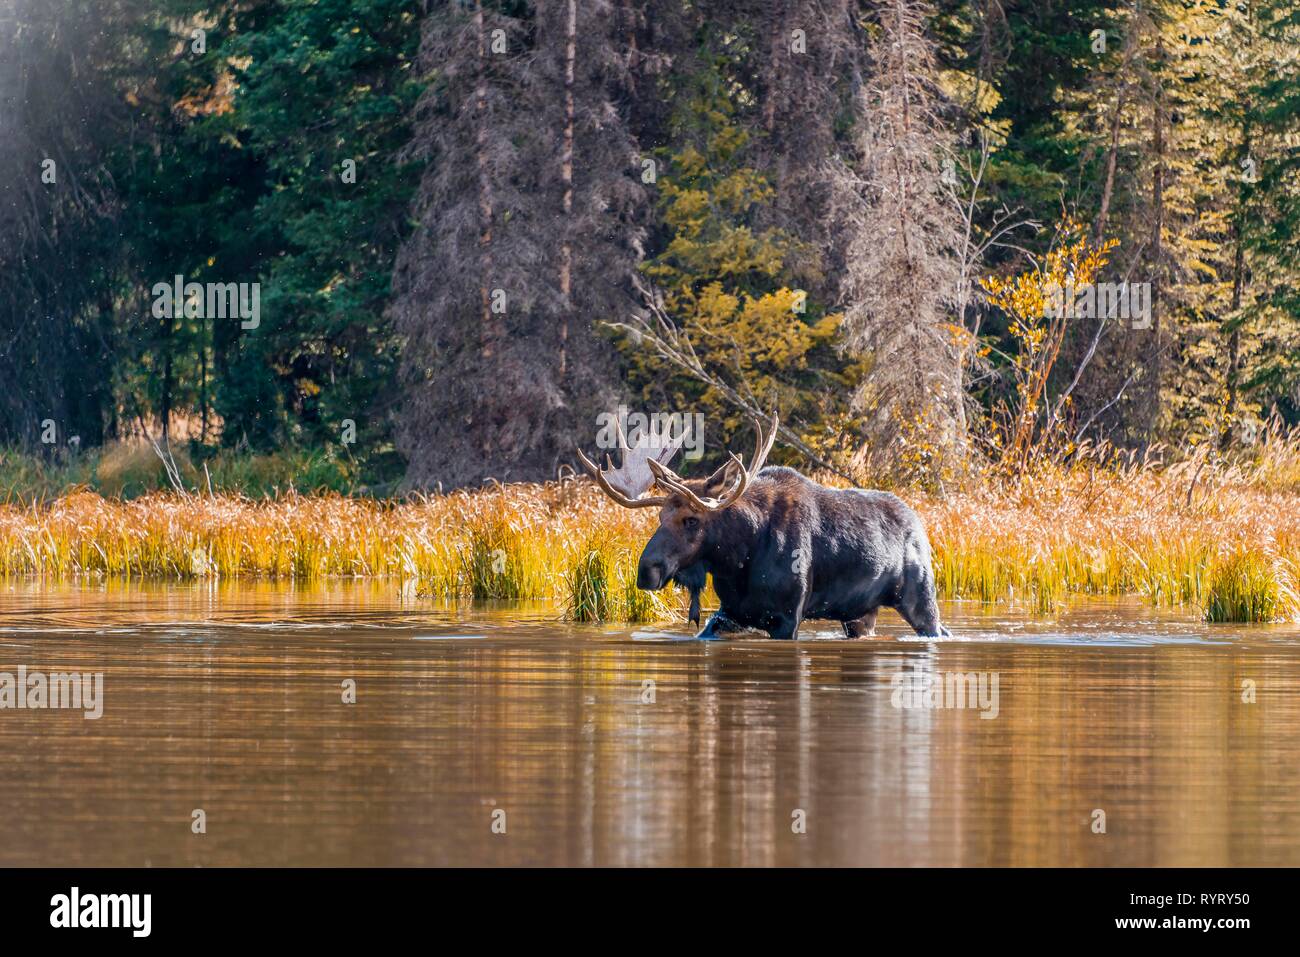 Elk (Alces alces), male elk runs in a lake, Grand Teton National Park, Wyoming, USA Stock Photo